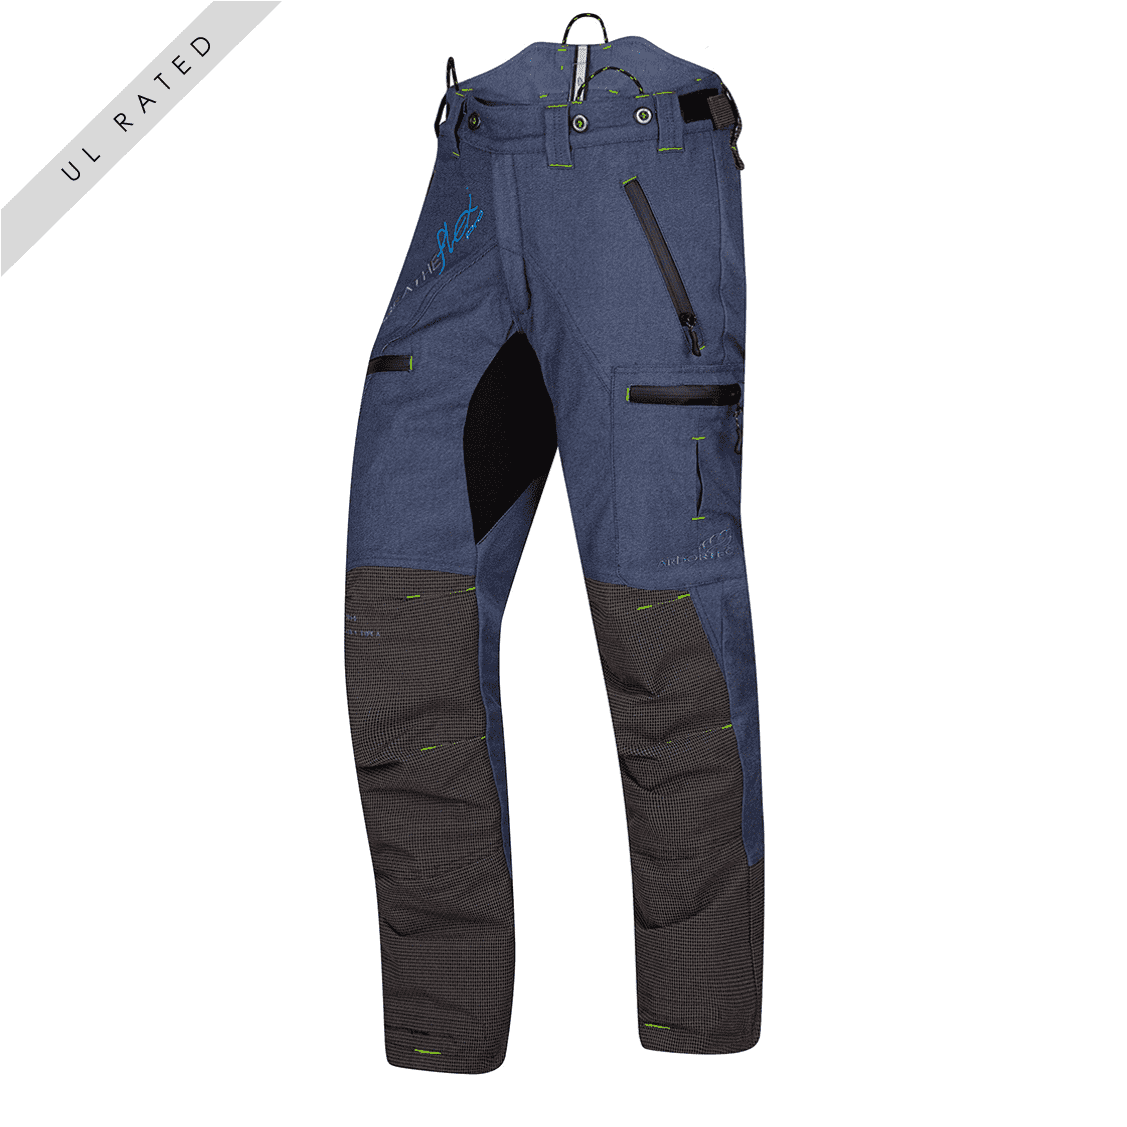 AT4060(US) Breatheflex Pro Chainsaw Trousers UL Rated -Denim Blue Legacy